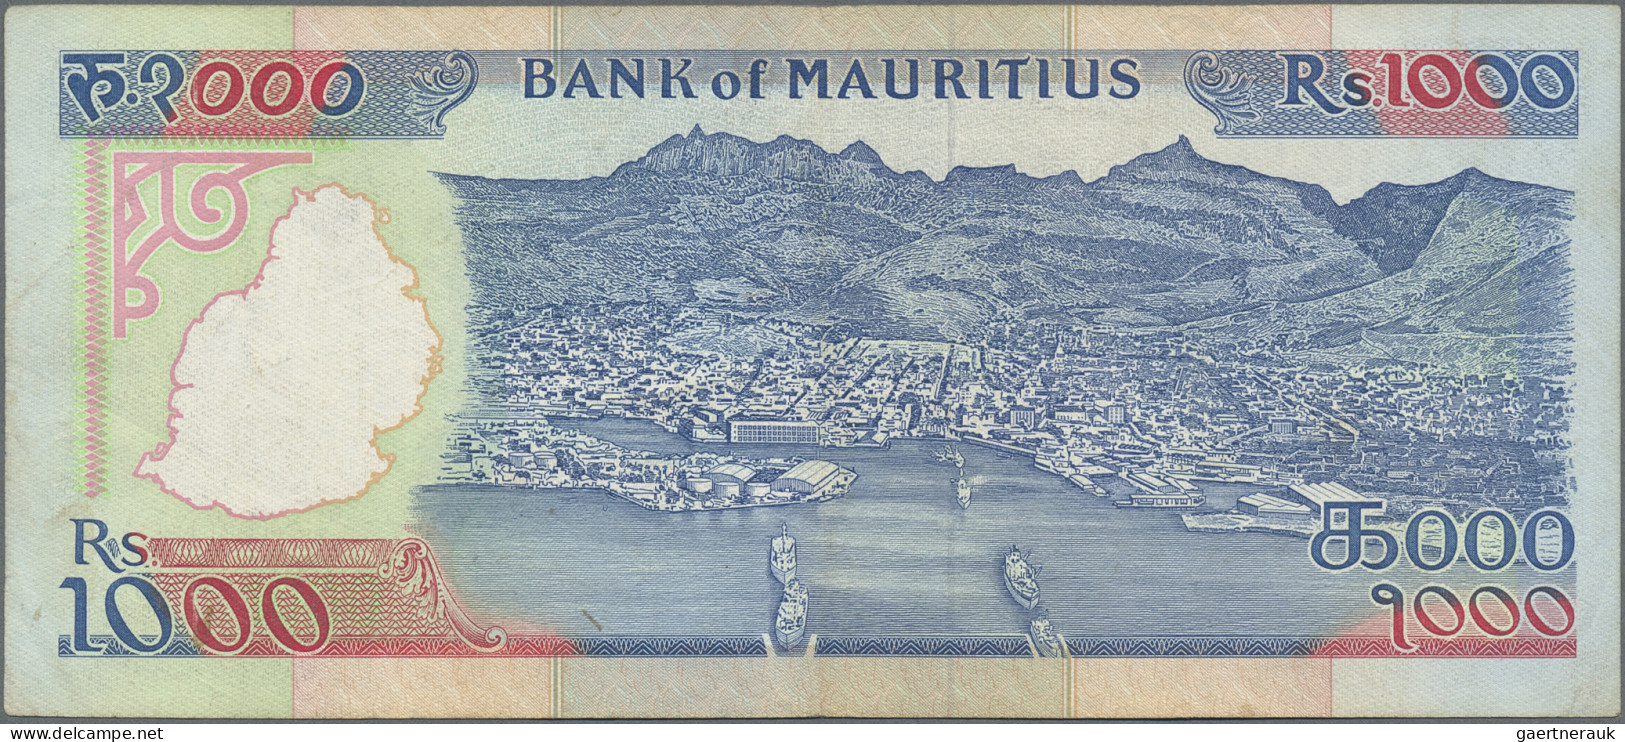 Mauritius: Bank Of Mauritius, 1.000 Rupees ND(1991), P.41, Still Very Nice With - Maurice